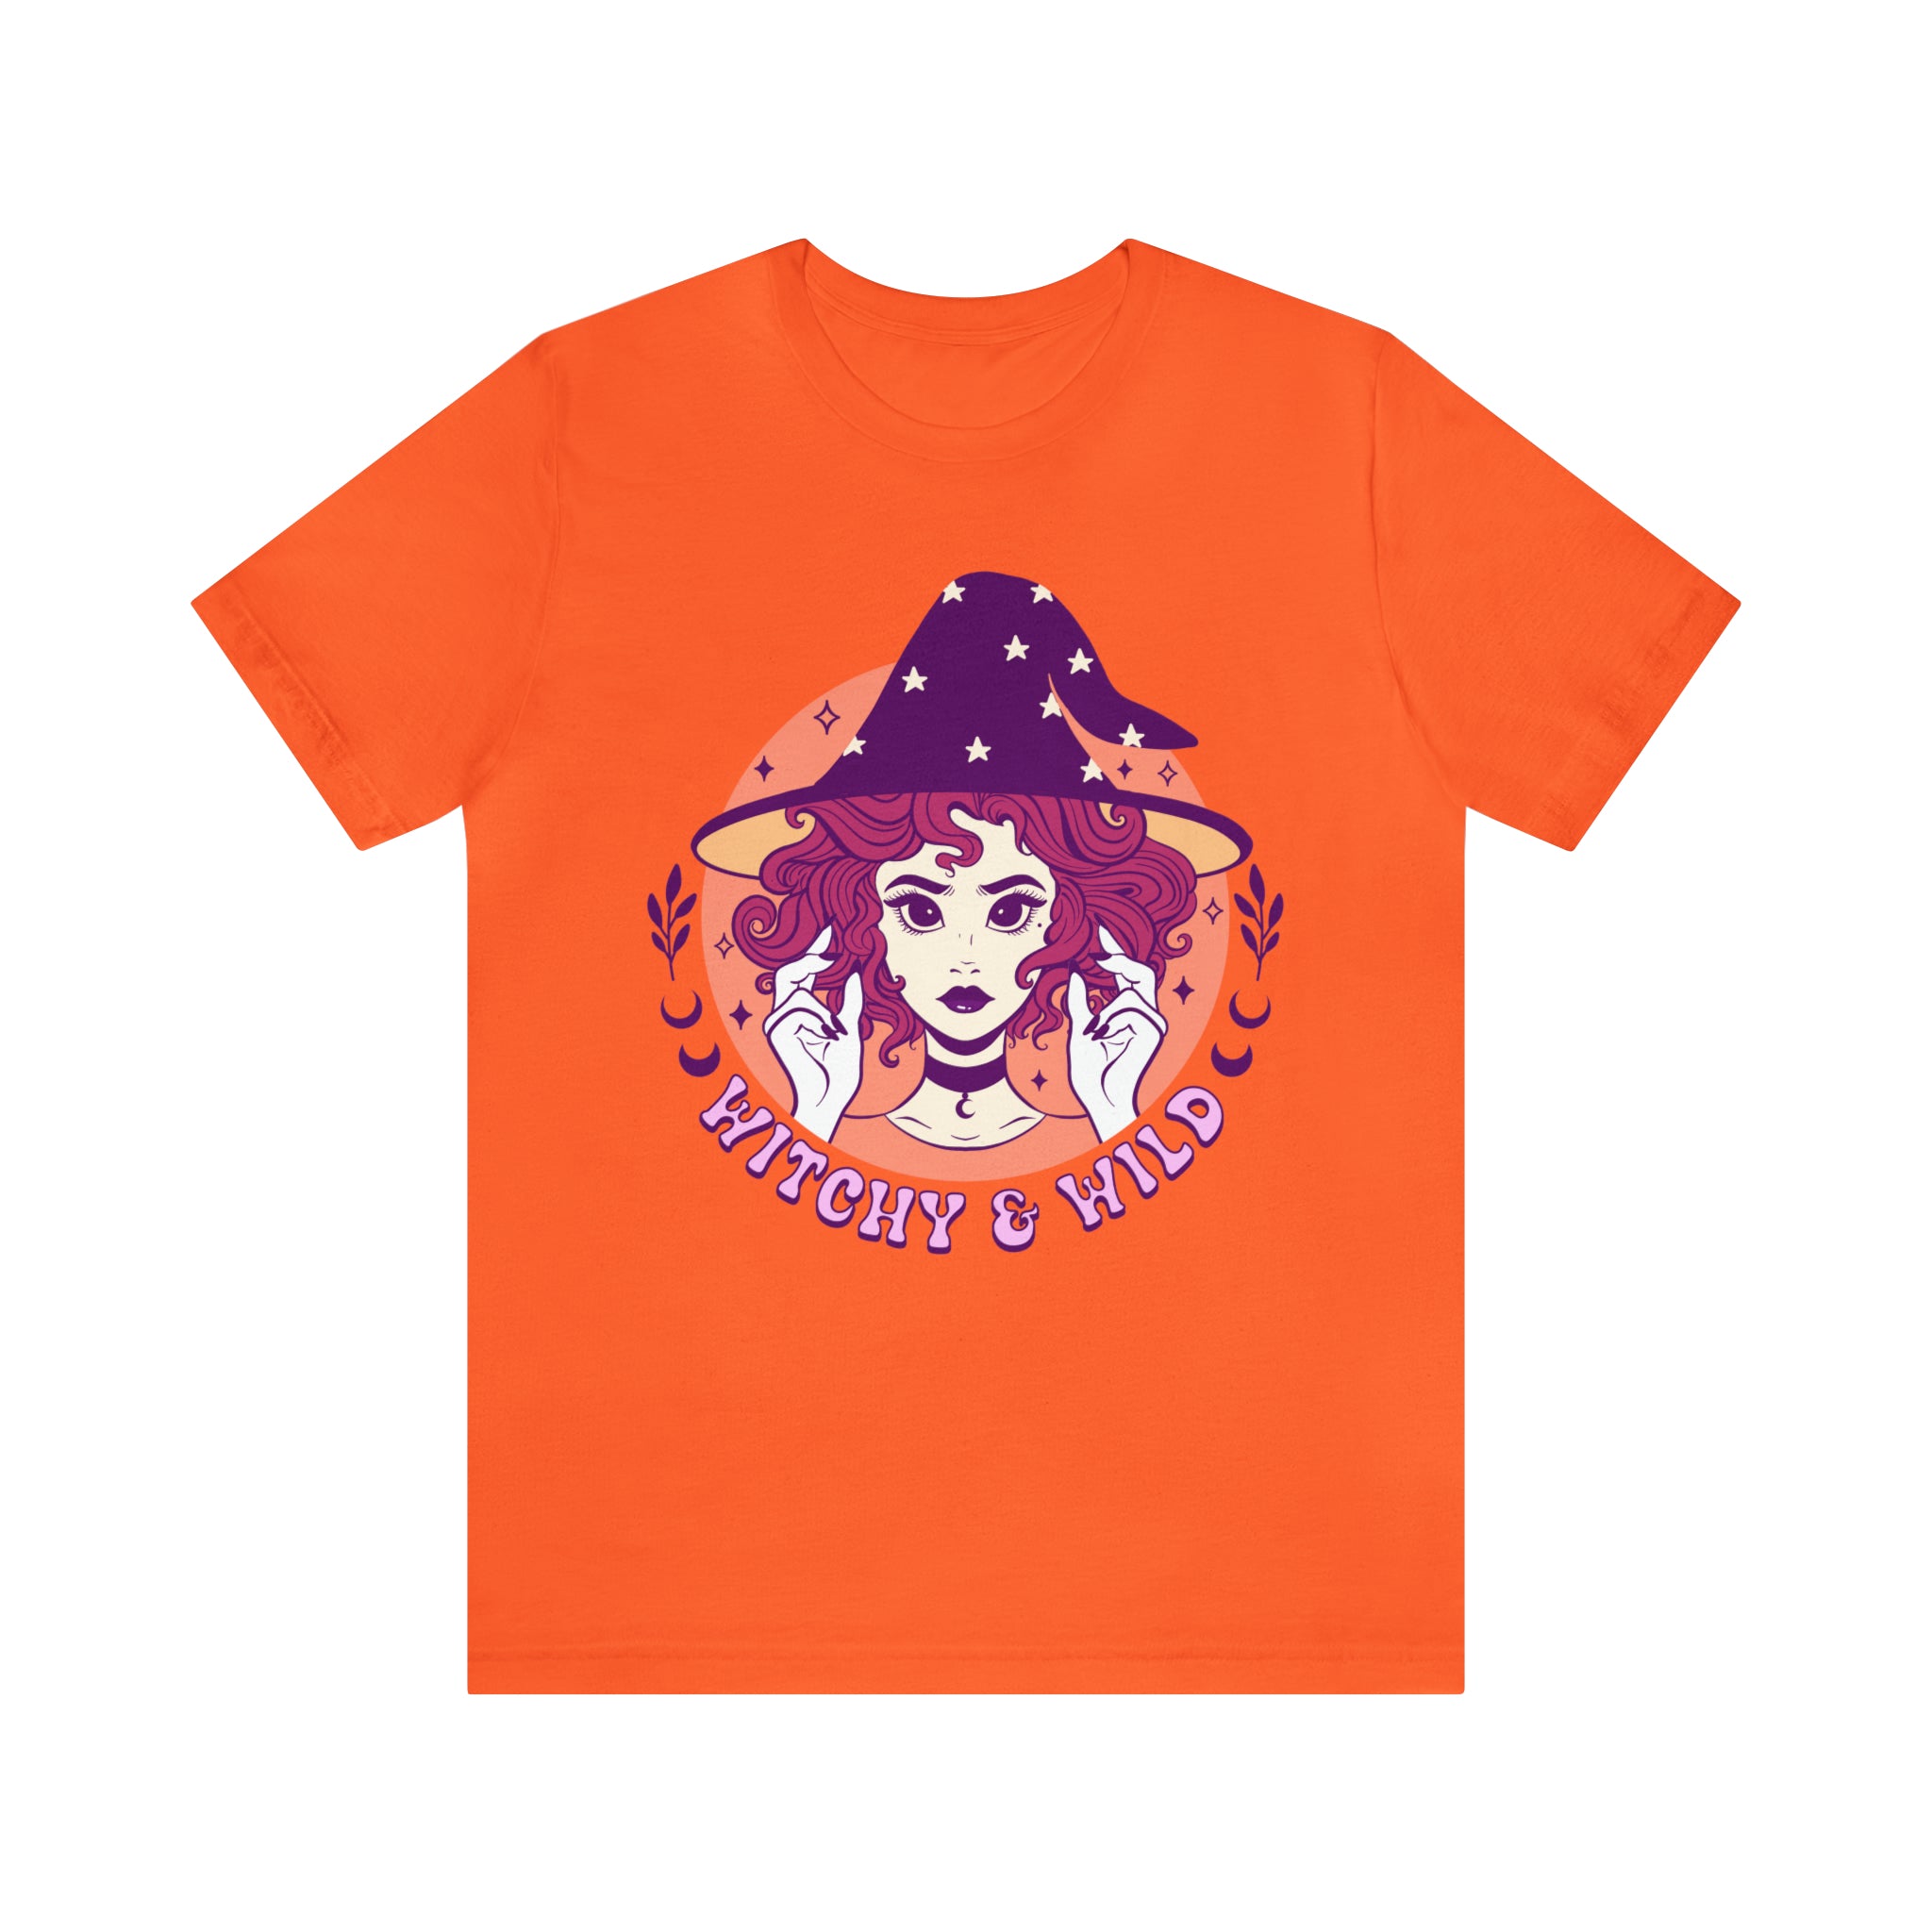 Witchy And Wild T-Shirt Black, Orange, White, Halloween Shirt, Witchy Vibes